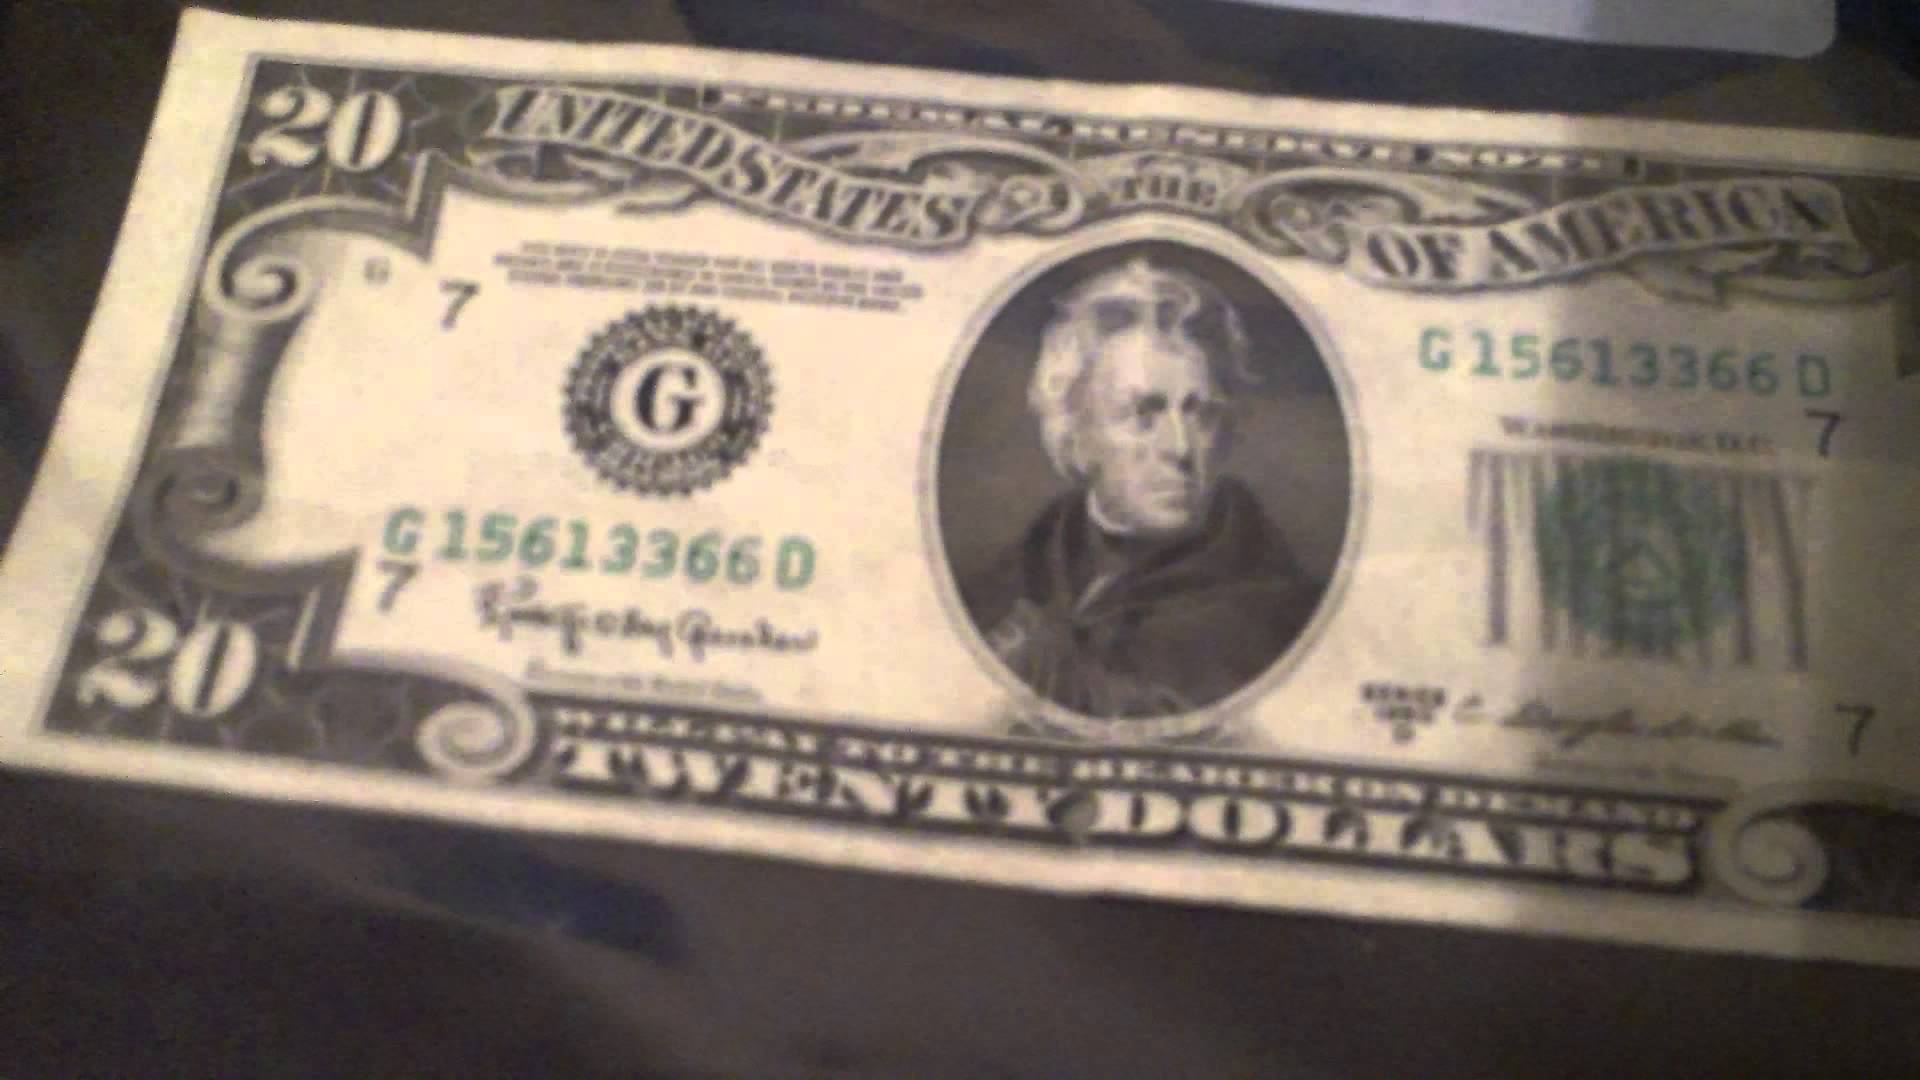 $20 bill 1950 G series bank of chicago - YouTube